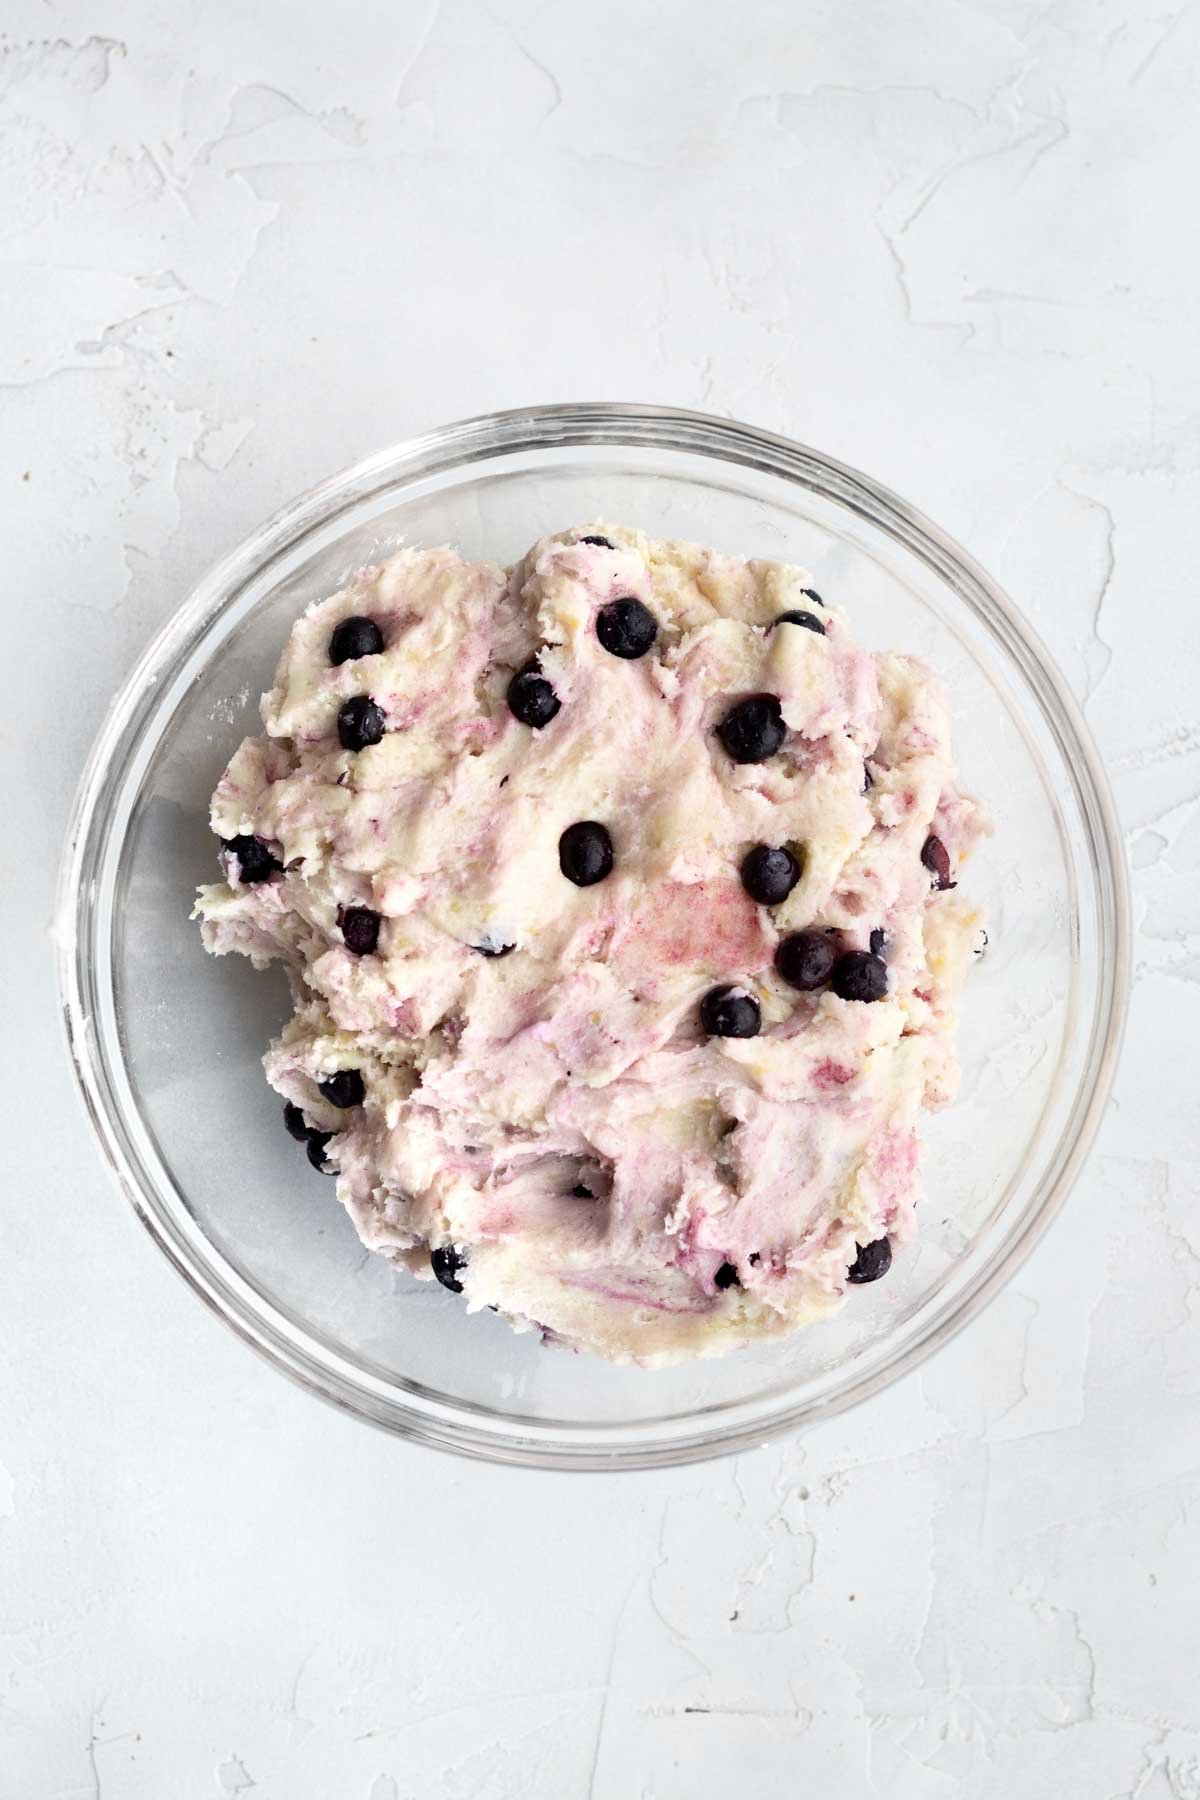 A bowl of Lemon Blueberry Cookie dough with regular frozen blueberries.